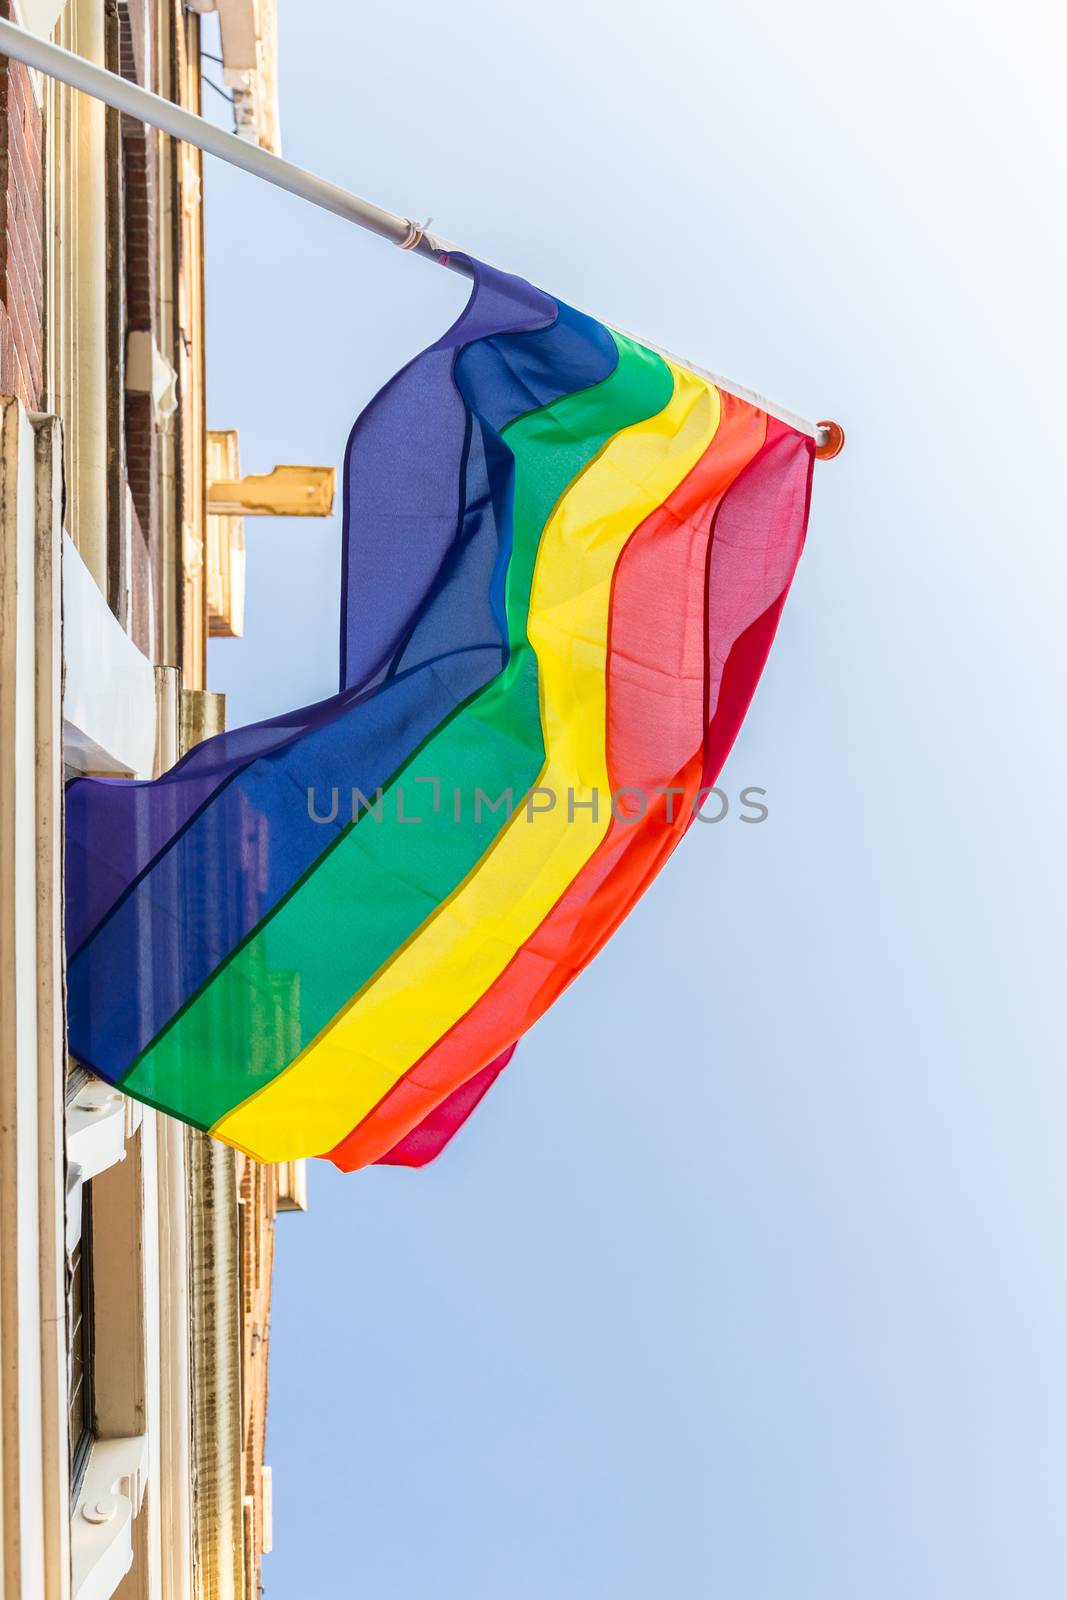 Amsterdam Pride festival rainbow flag hanging from canal house on Keizersgracht viewed from below